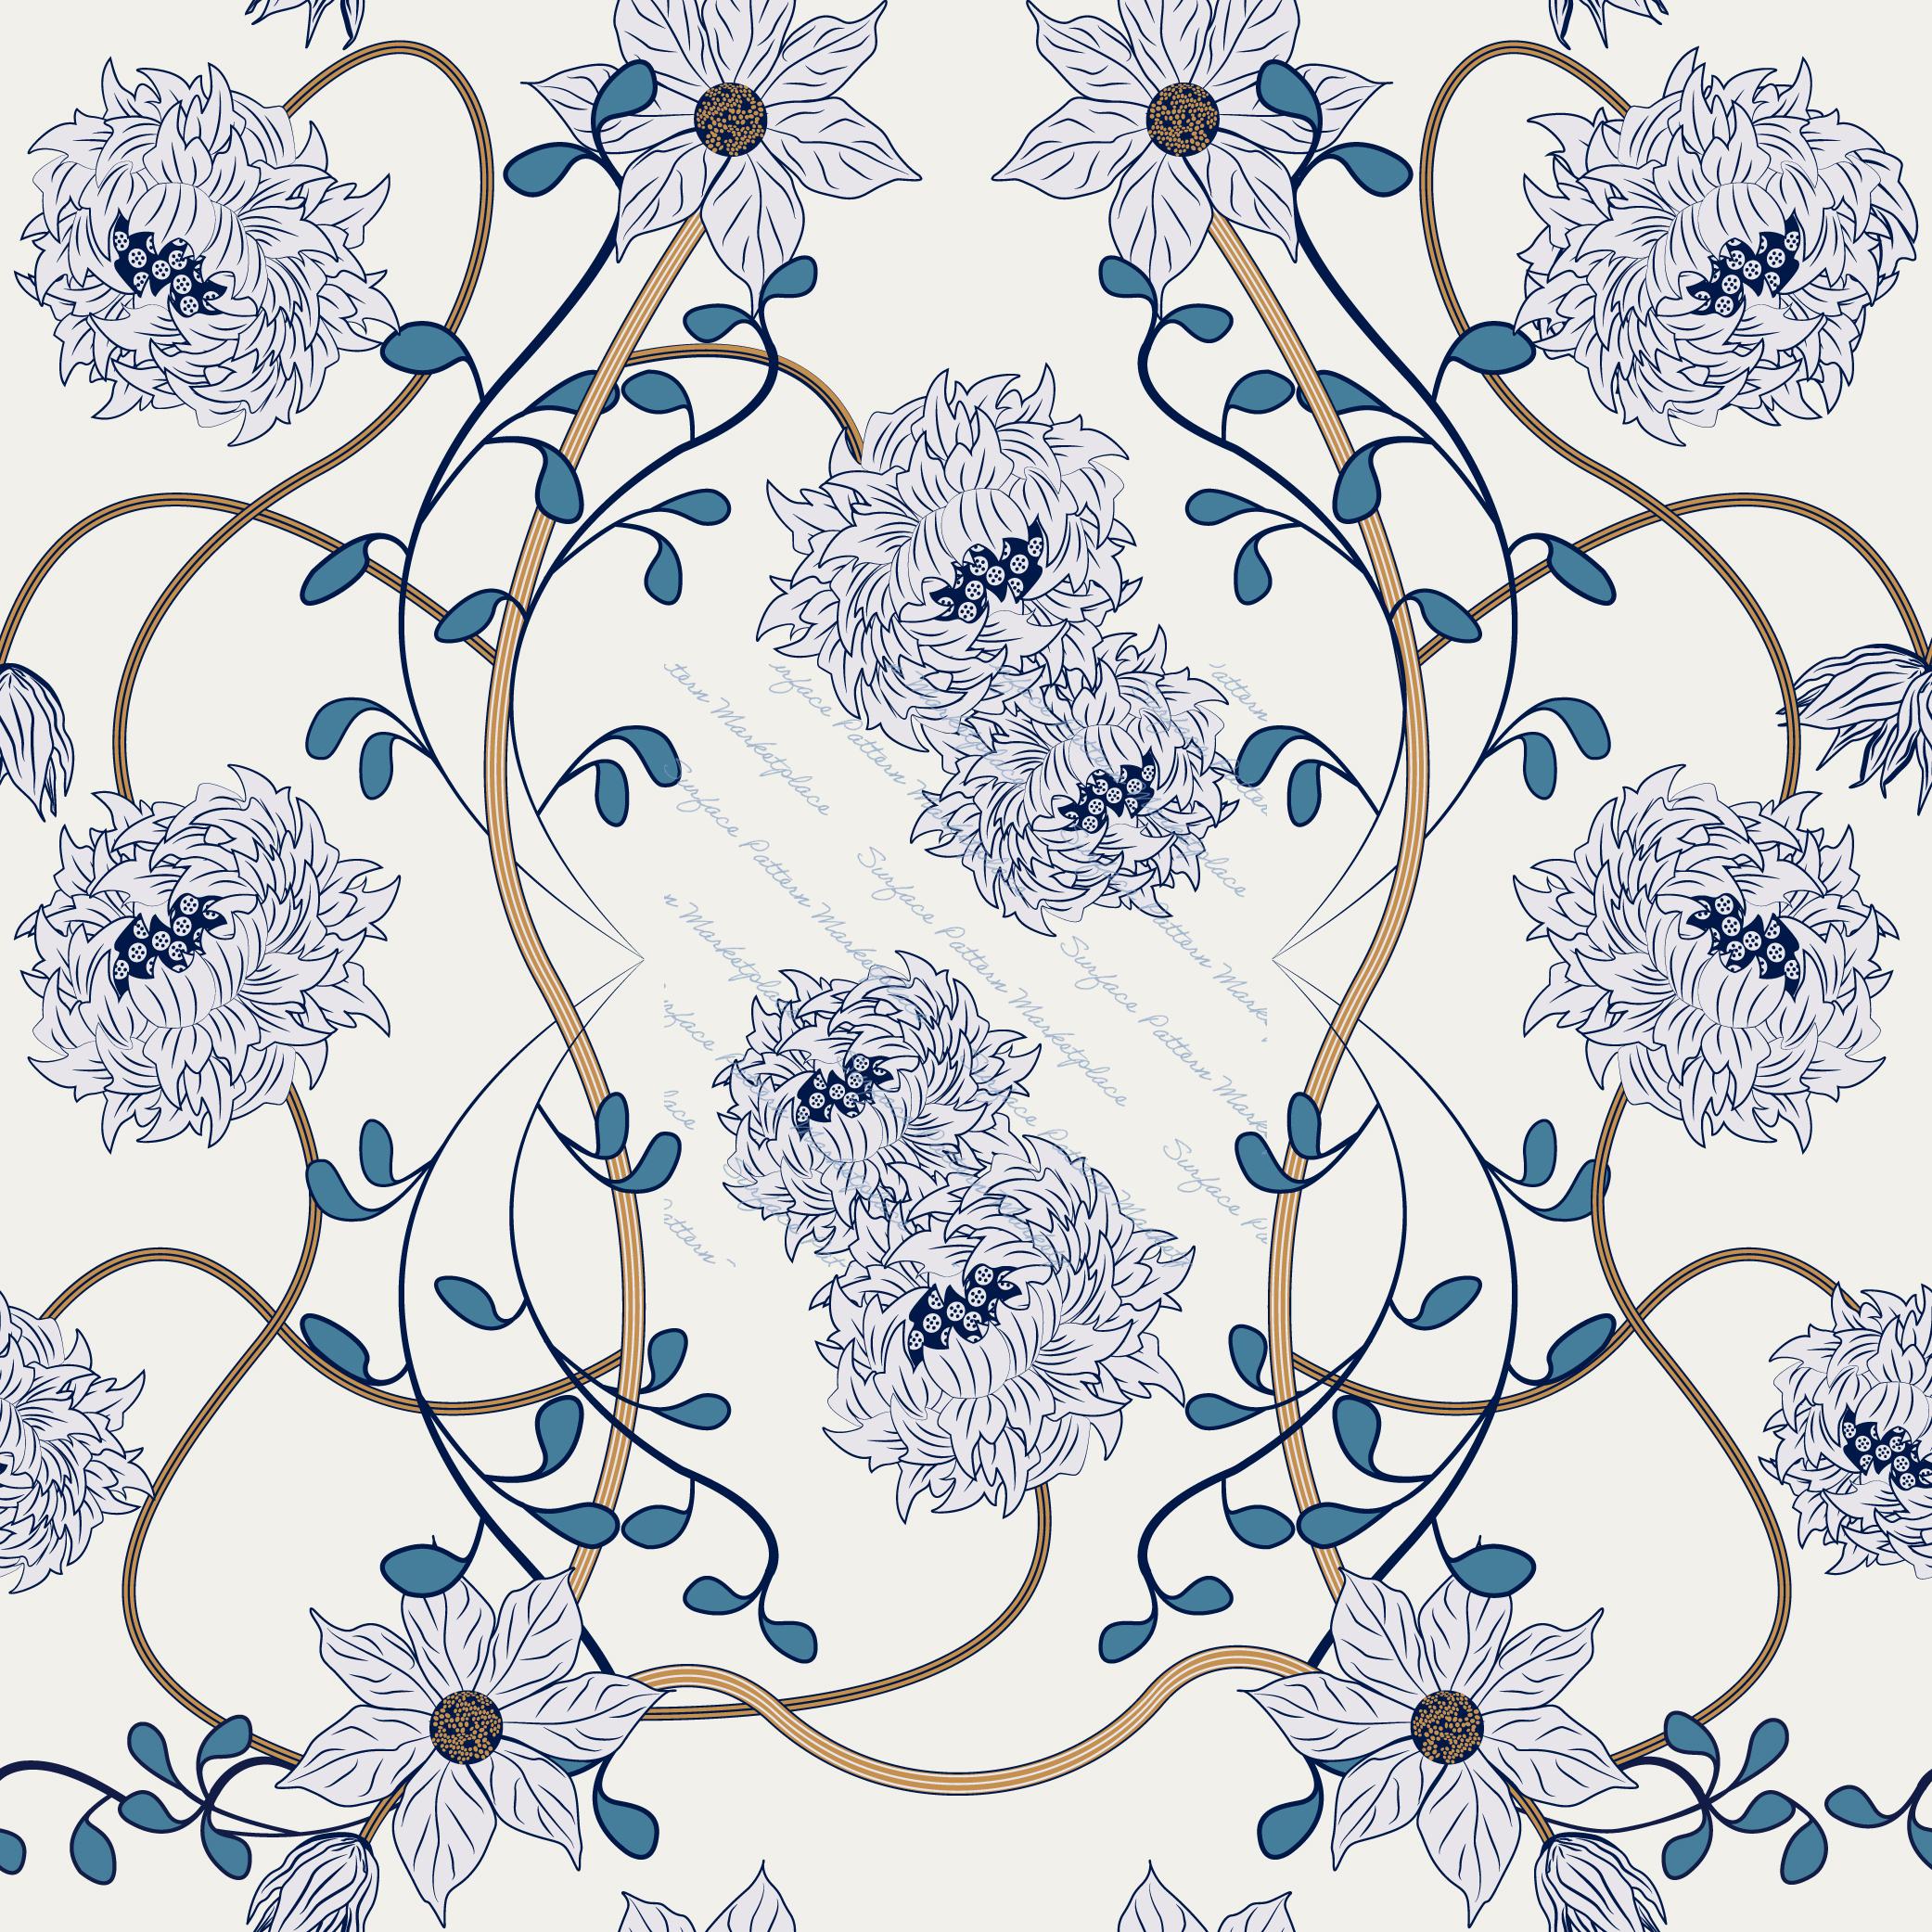 'Chinoiserie' inspired by the British arts.